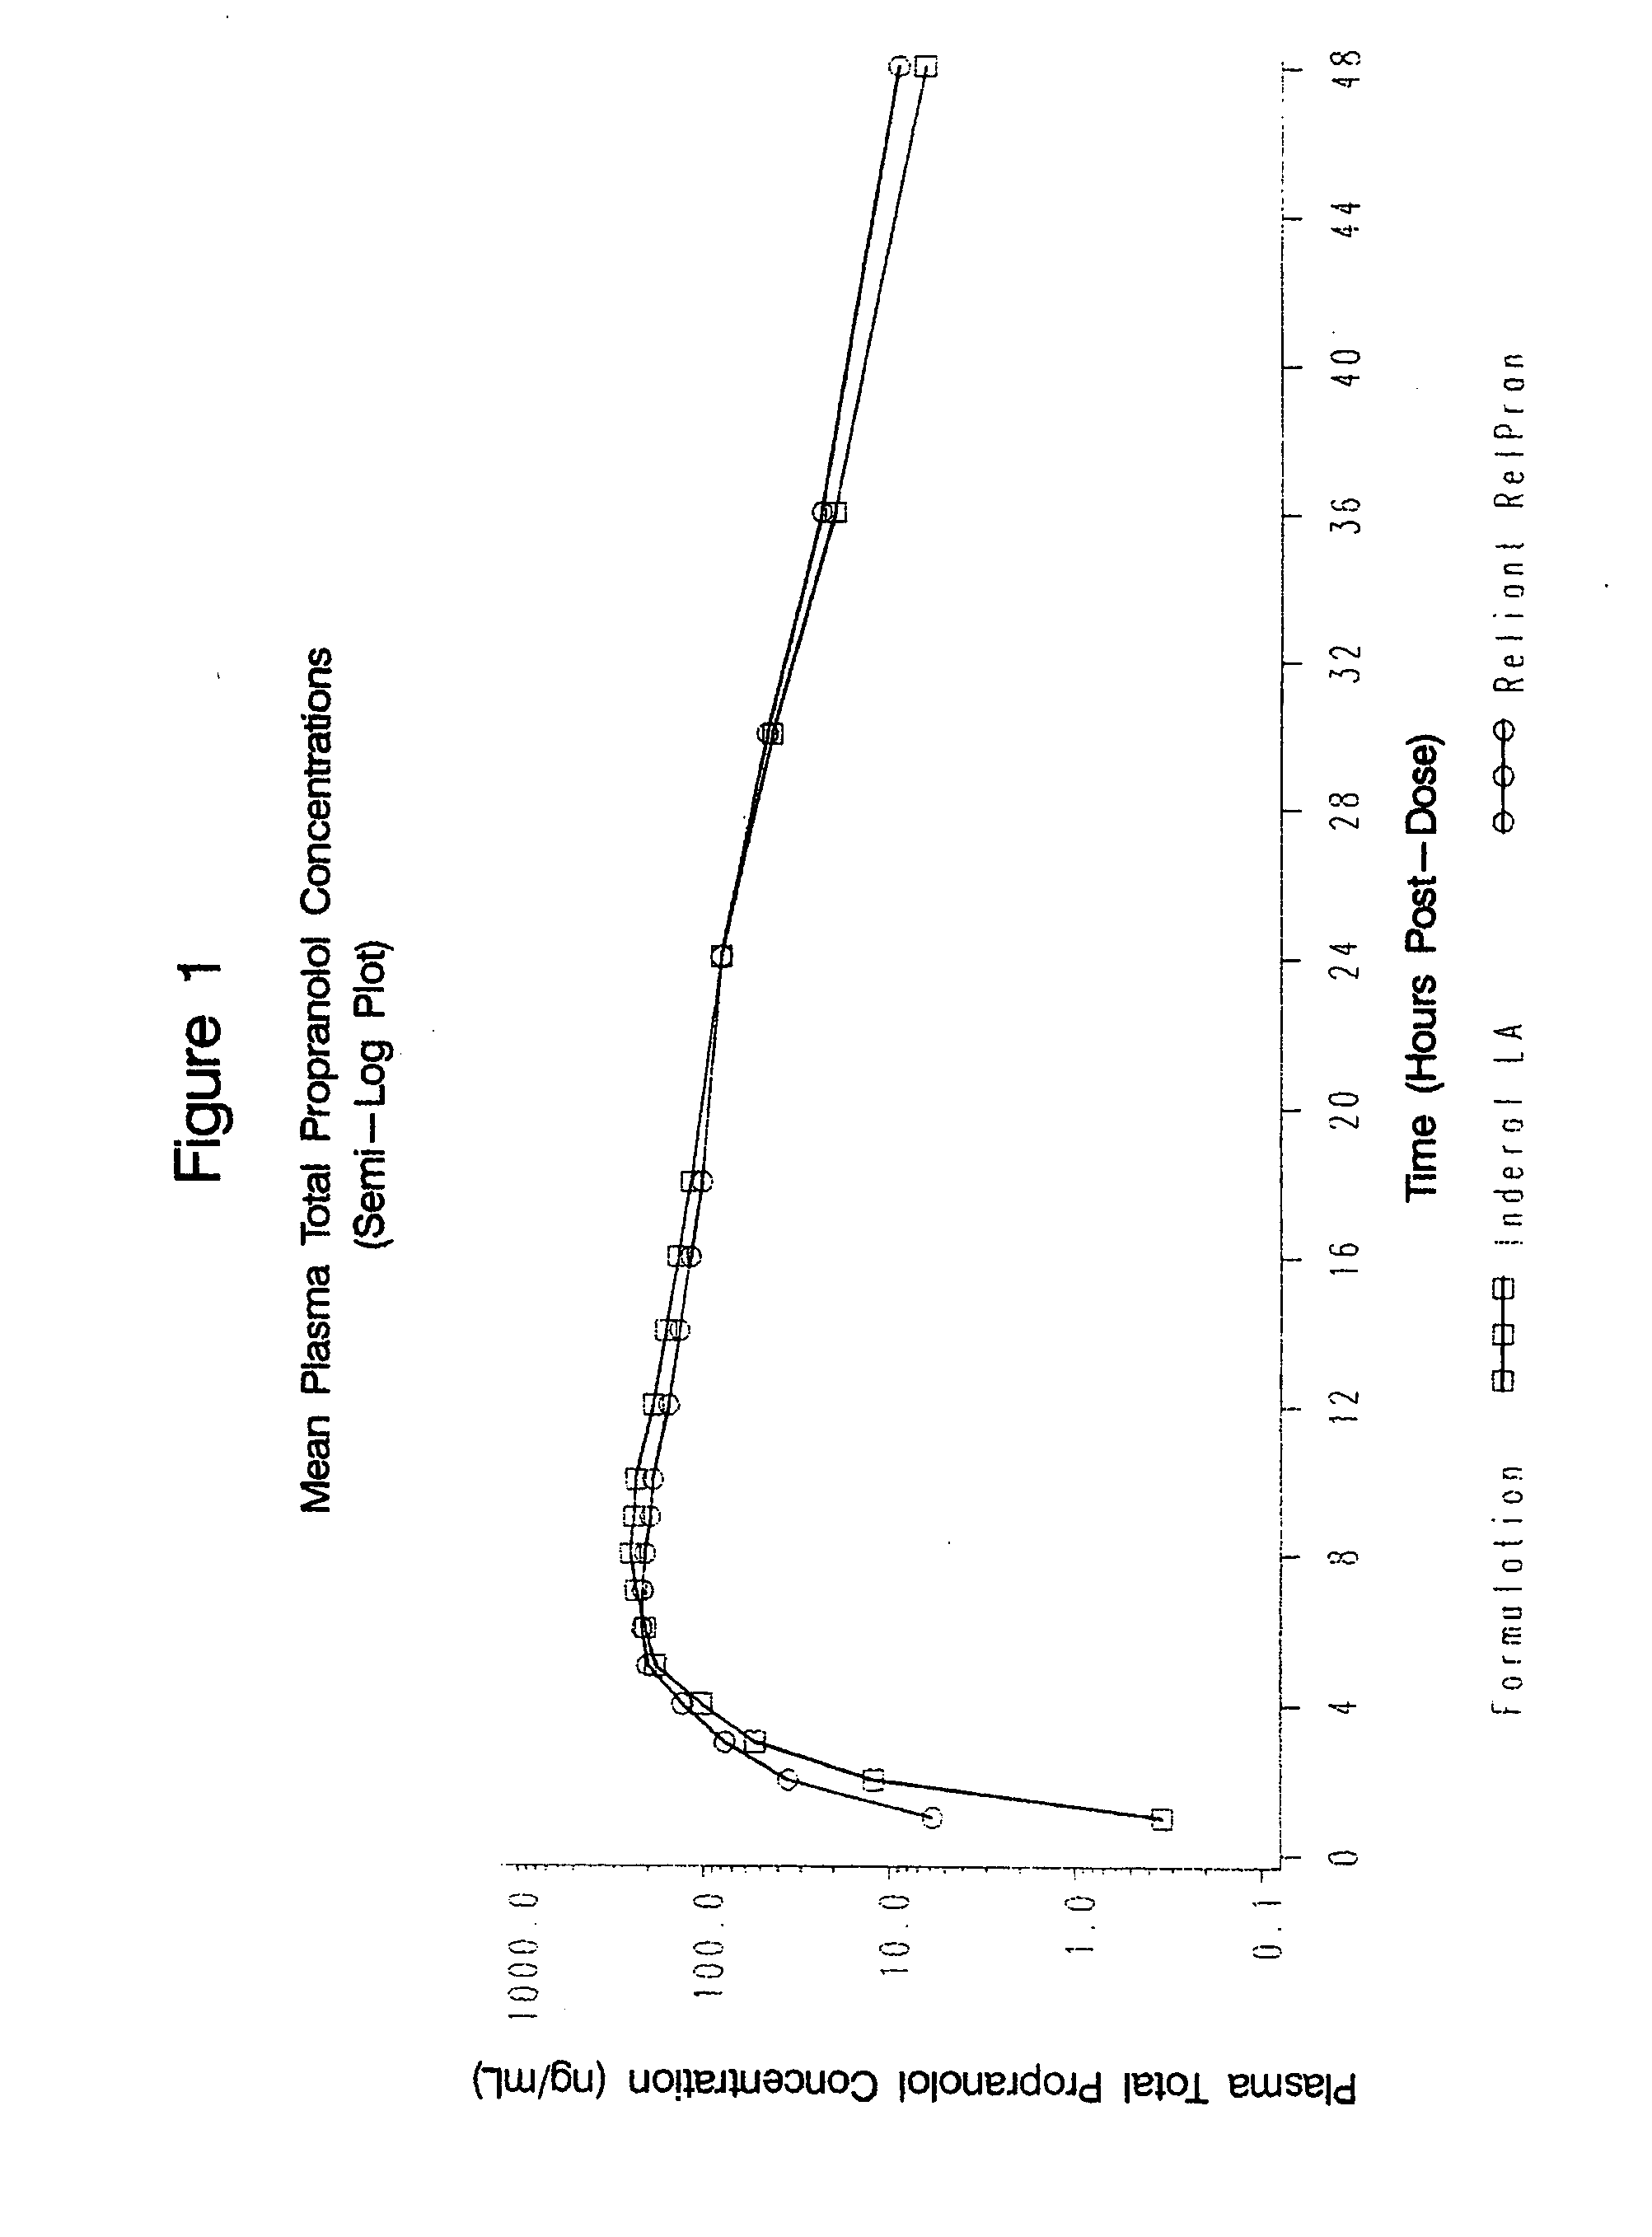 Time-sustained-release formulations comprising a beta-blocker